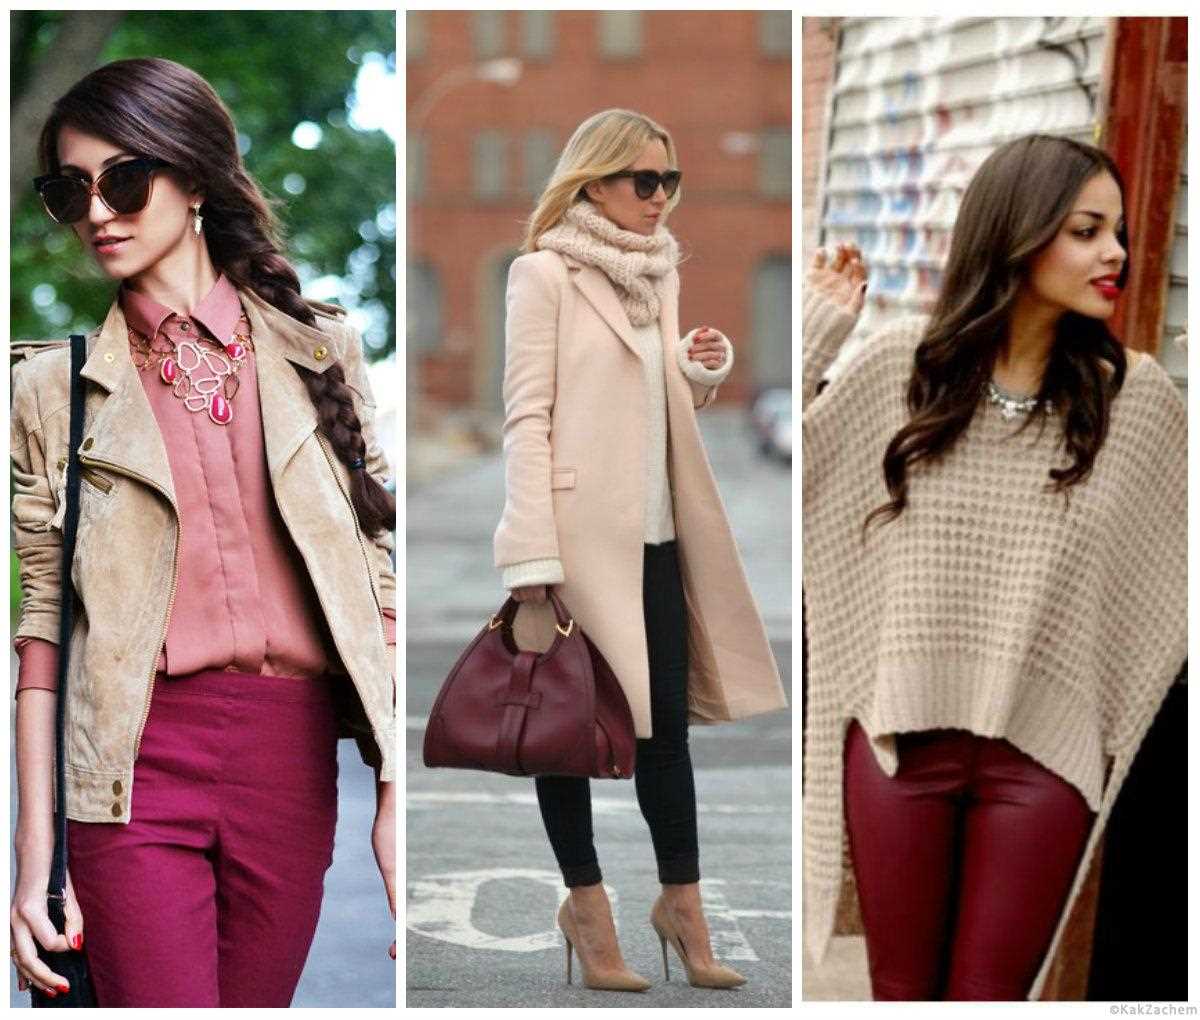 the idea of ​​using interesting beige in clothing design